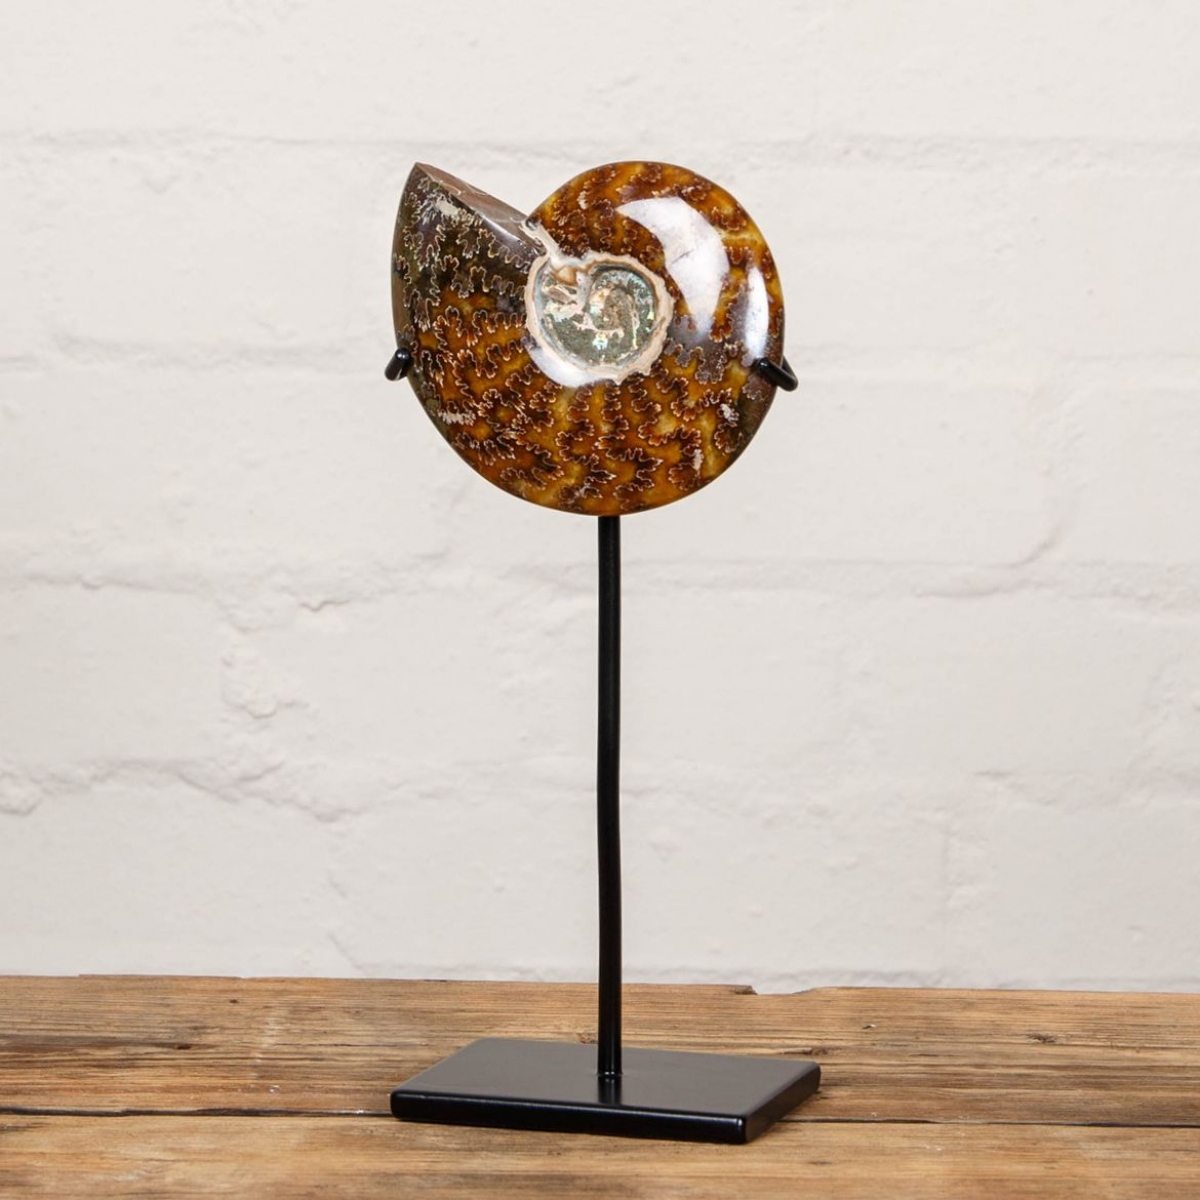 4.5 inch Whole Polished Ammonite Fossil on Stand (Cleoniceras sp)